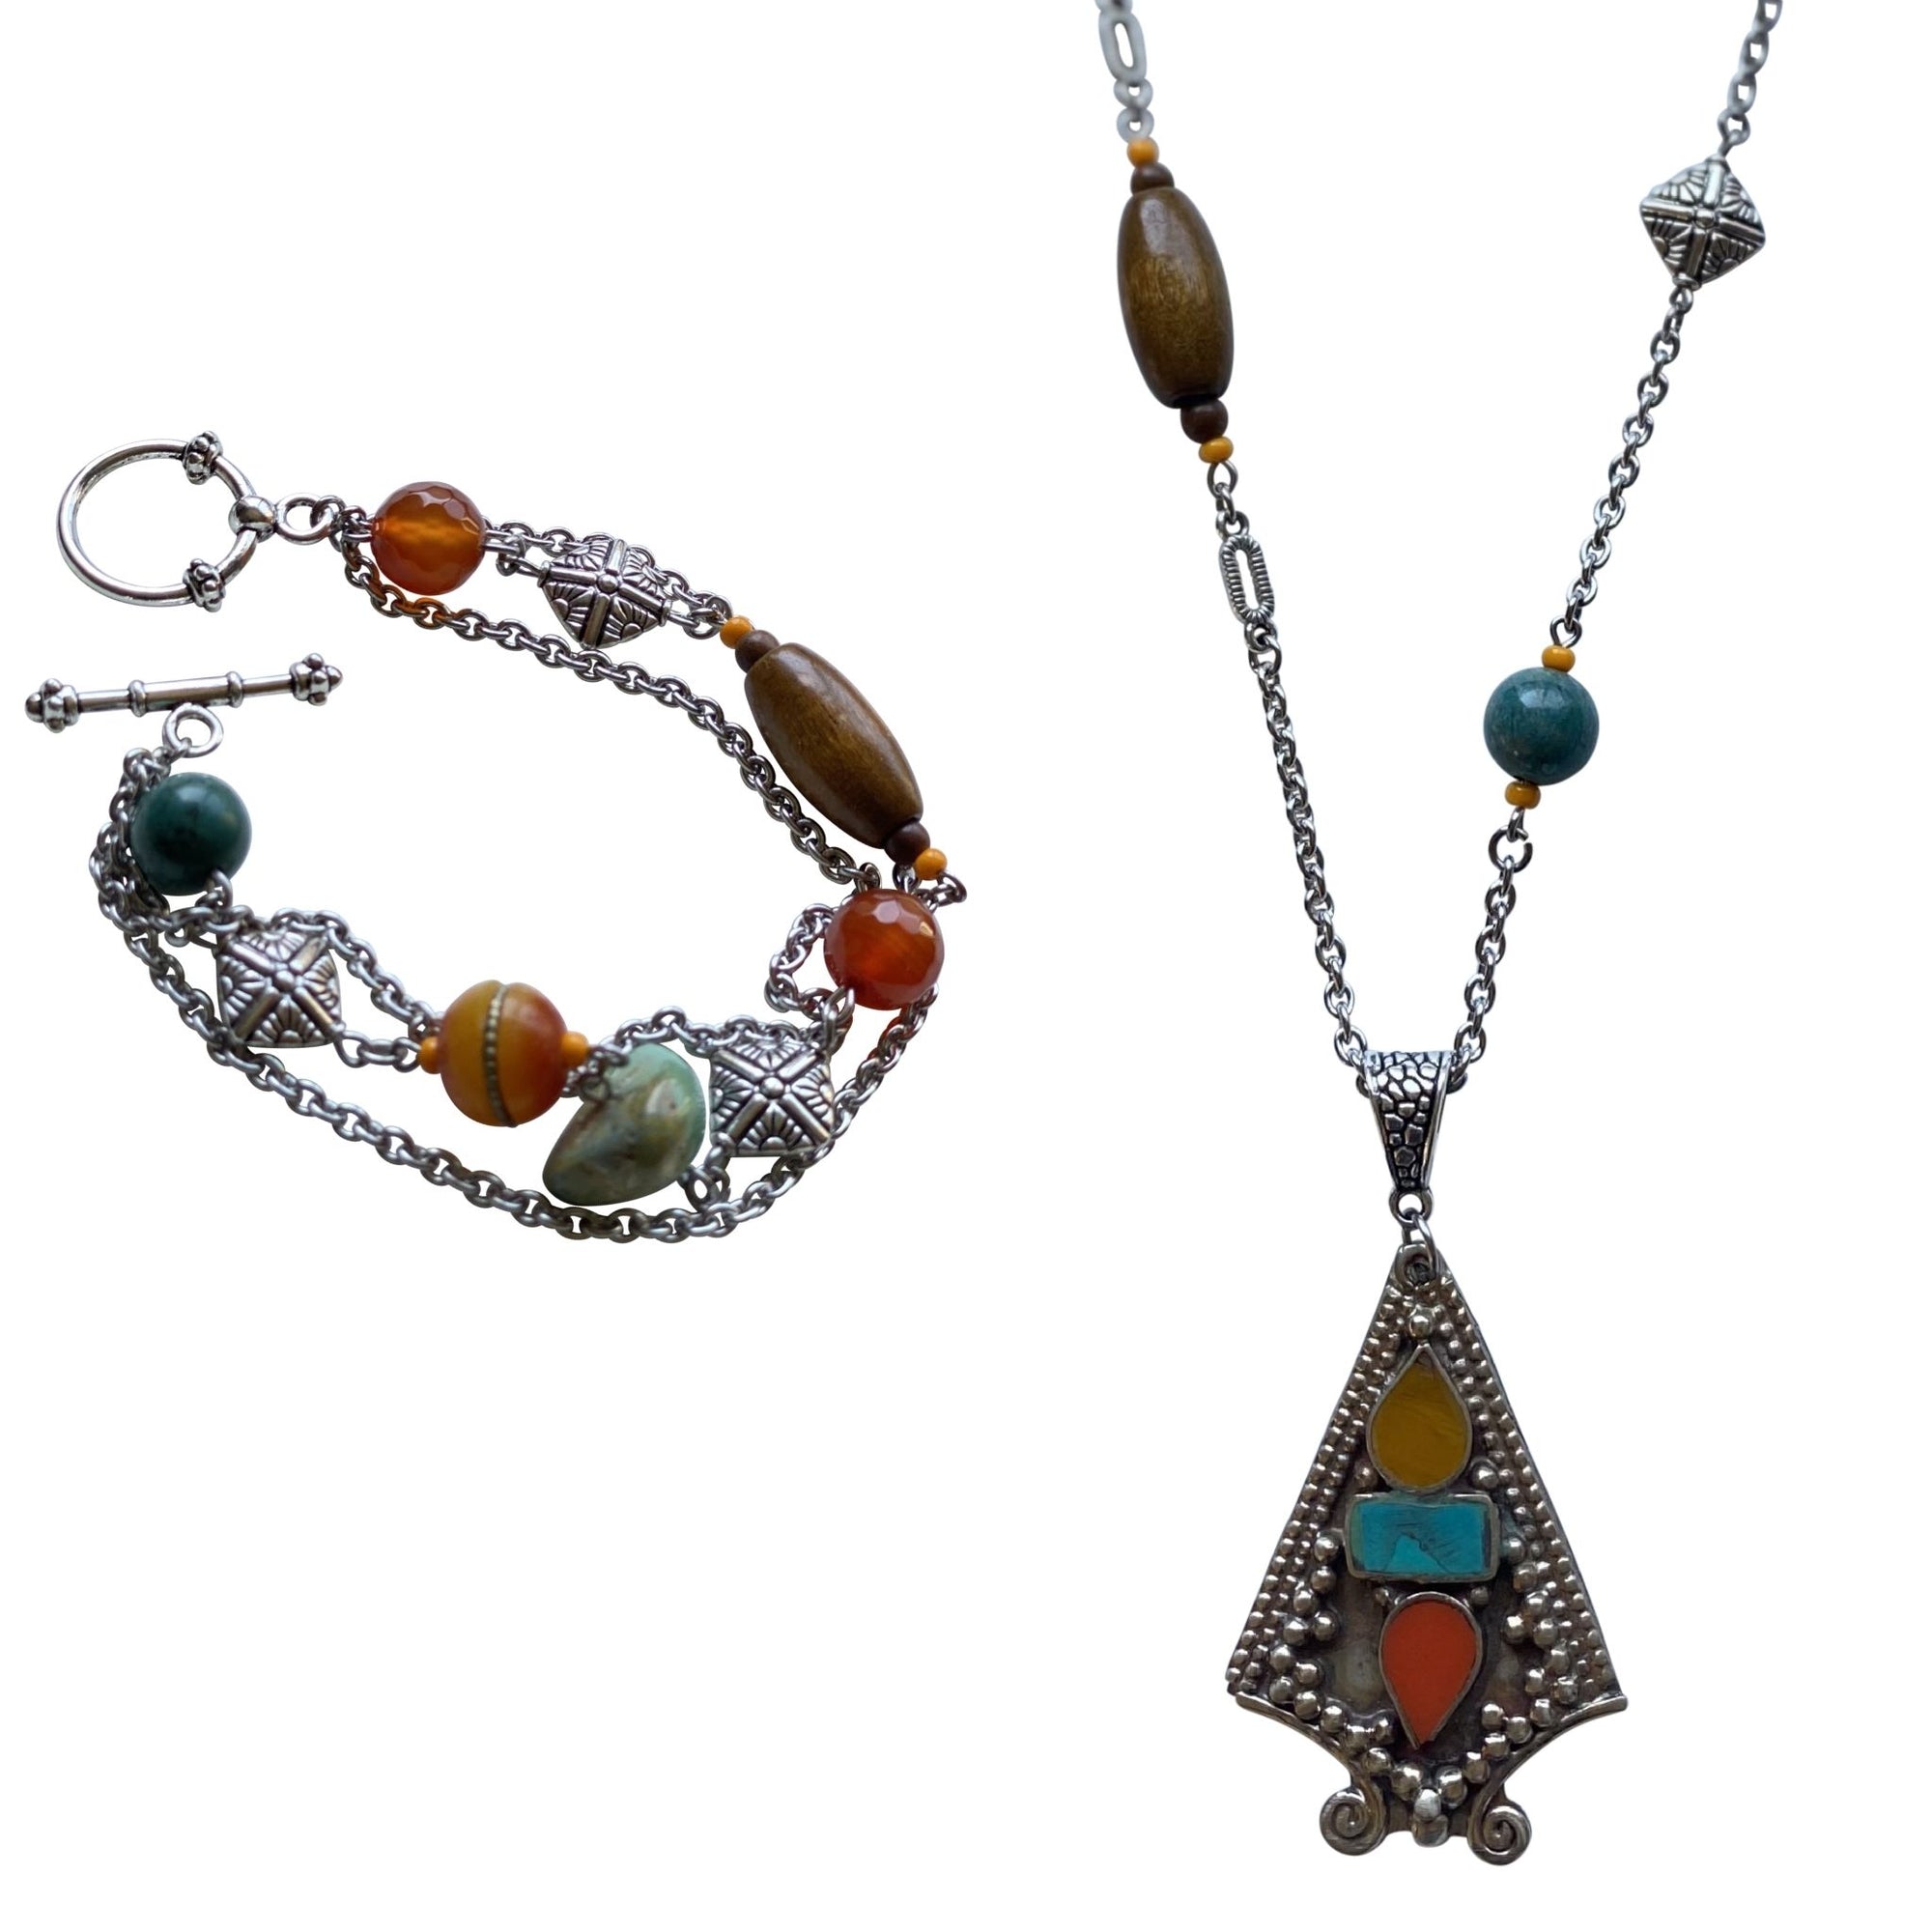 Tibetan Pendant Necklace with Stainless Steel Chain, Pewter Beads, Gemstones, Wood Beads